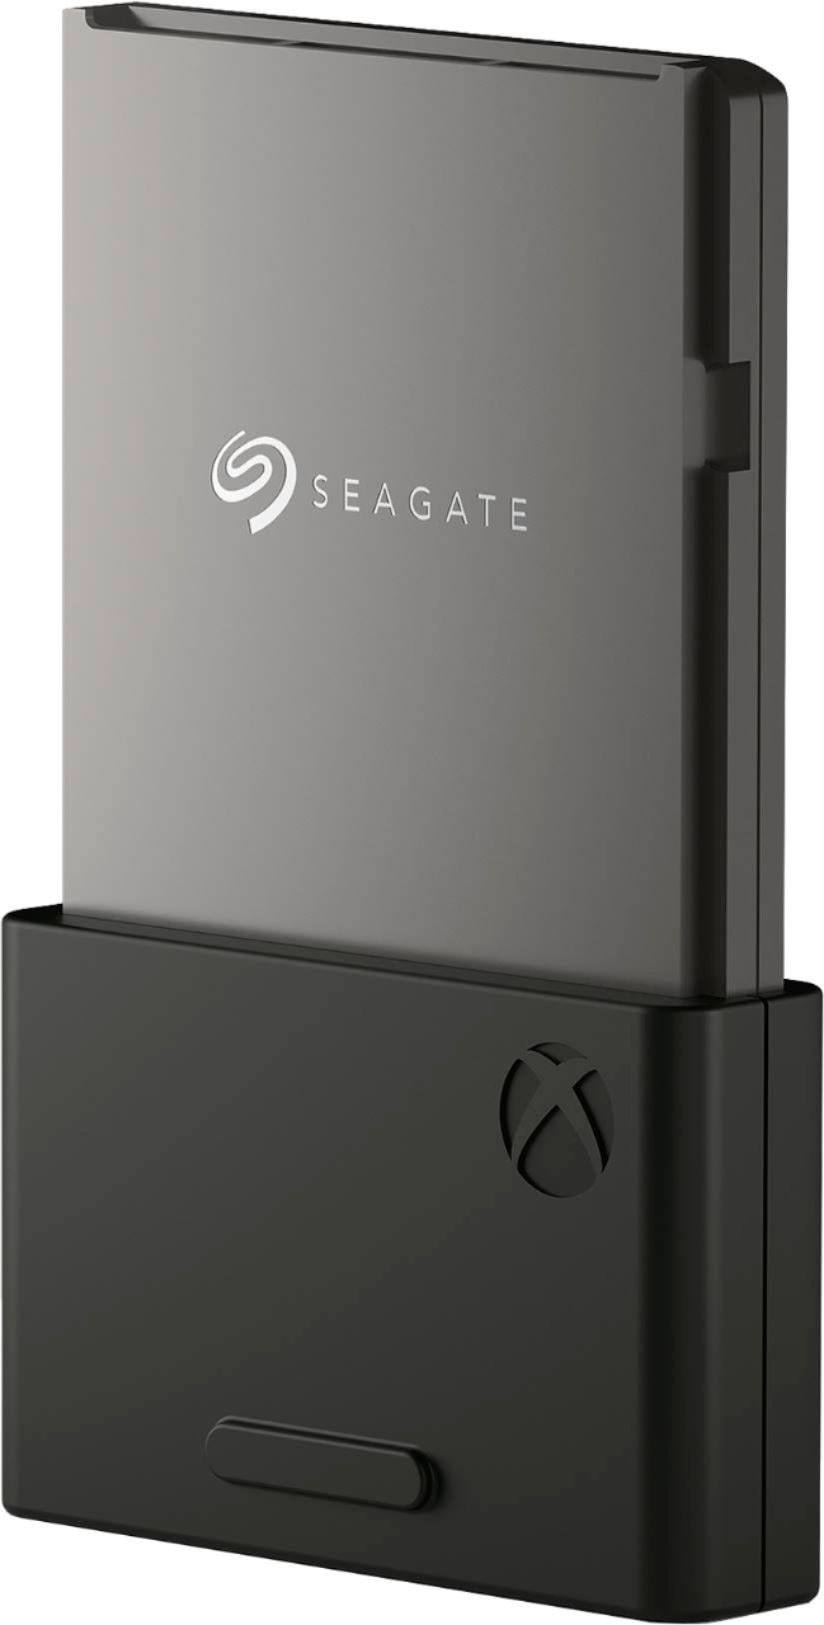 Seagate - 1TB Storage Expansion Card for Xbox Series X|S Internal NVMe SSD - Black_7